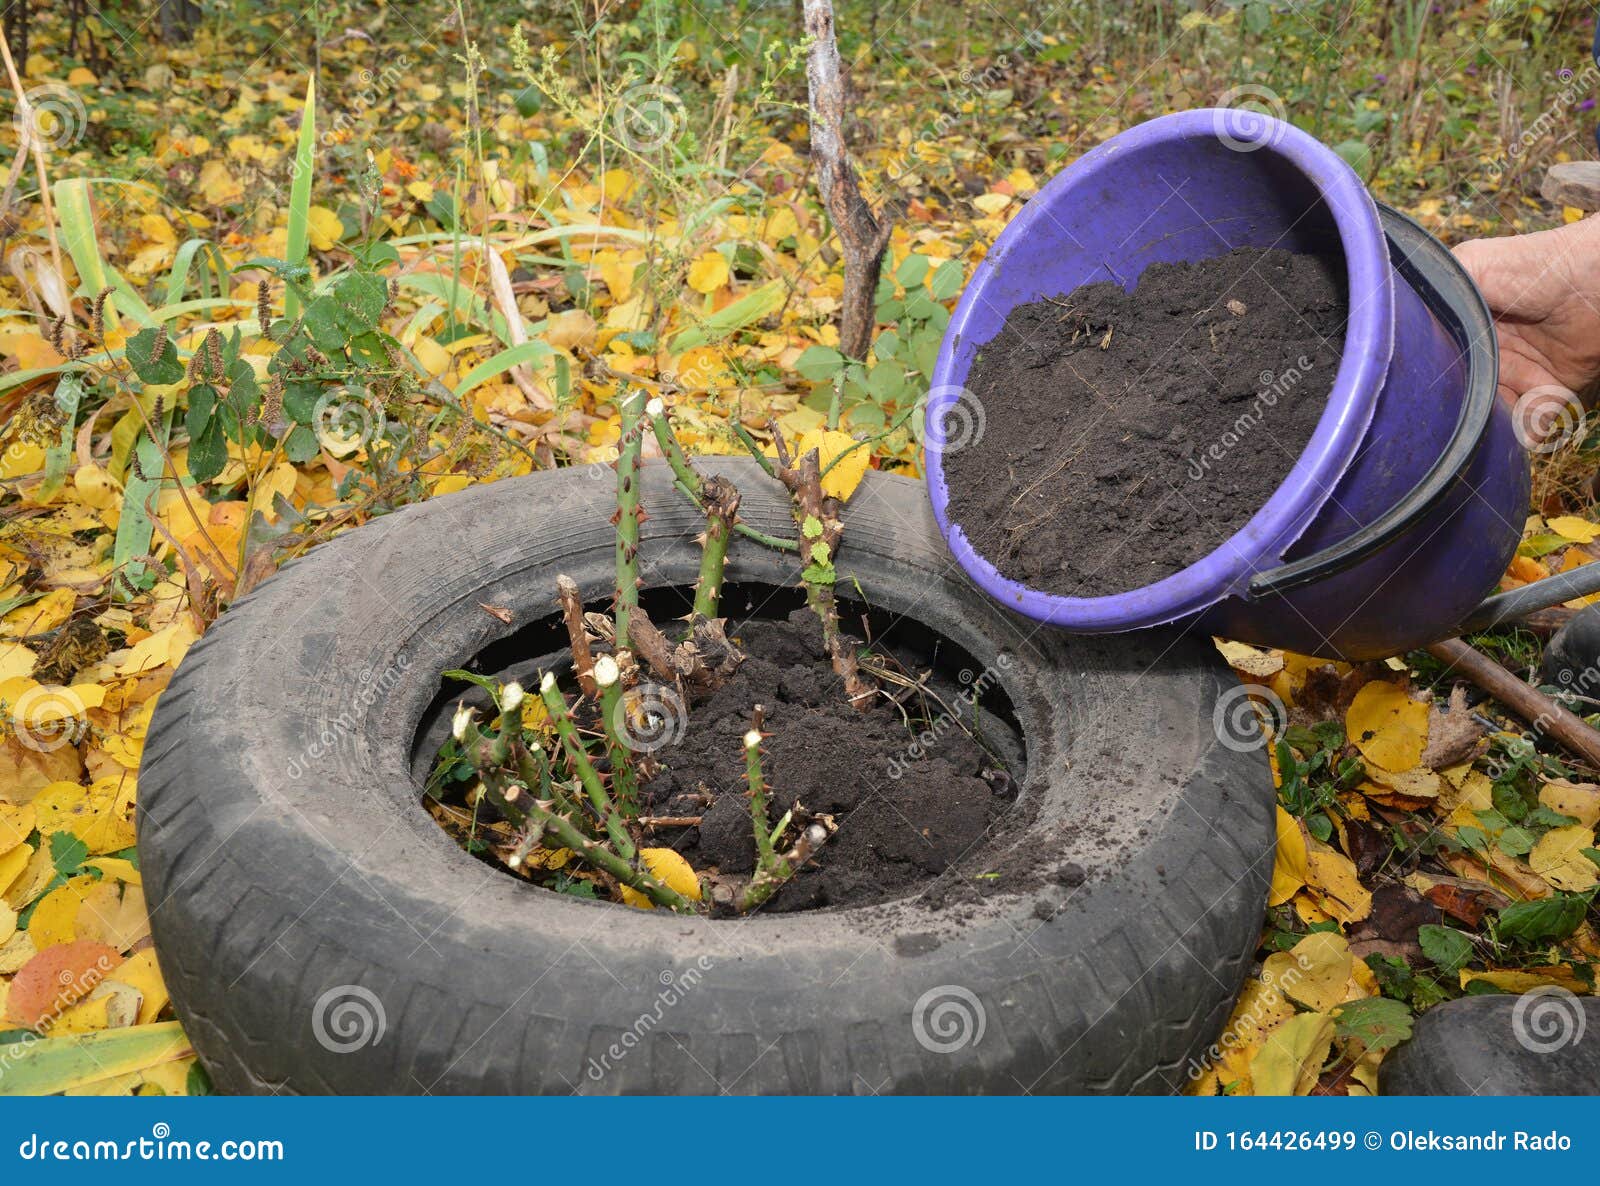 gardener making shelter for roses winter protection with dirt and car tire. insulate roses for winter